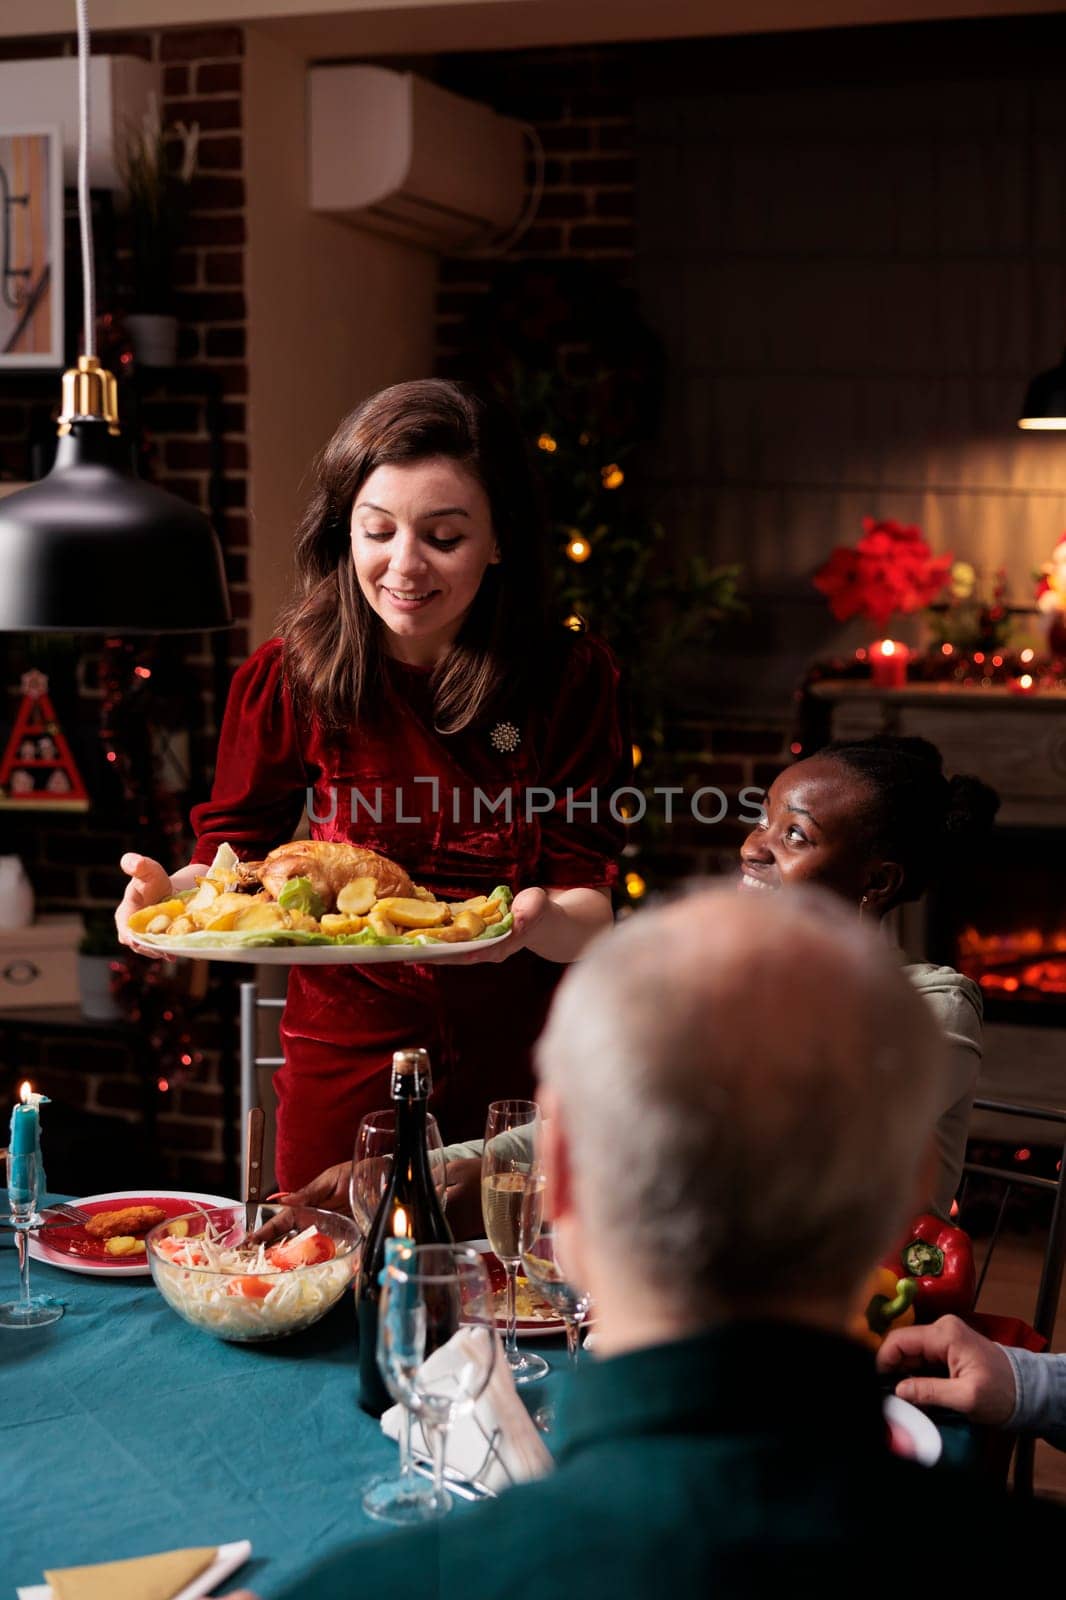 Woman putting festive food on table by DCStudio